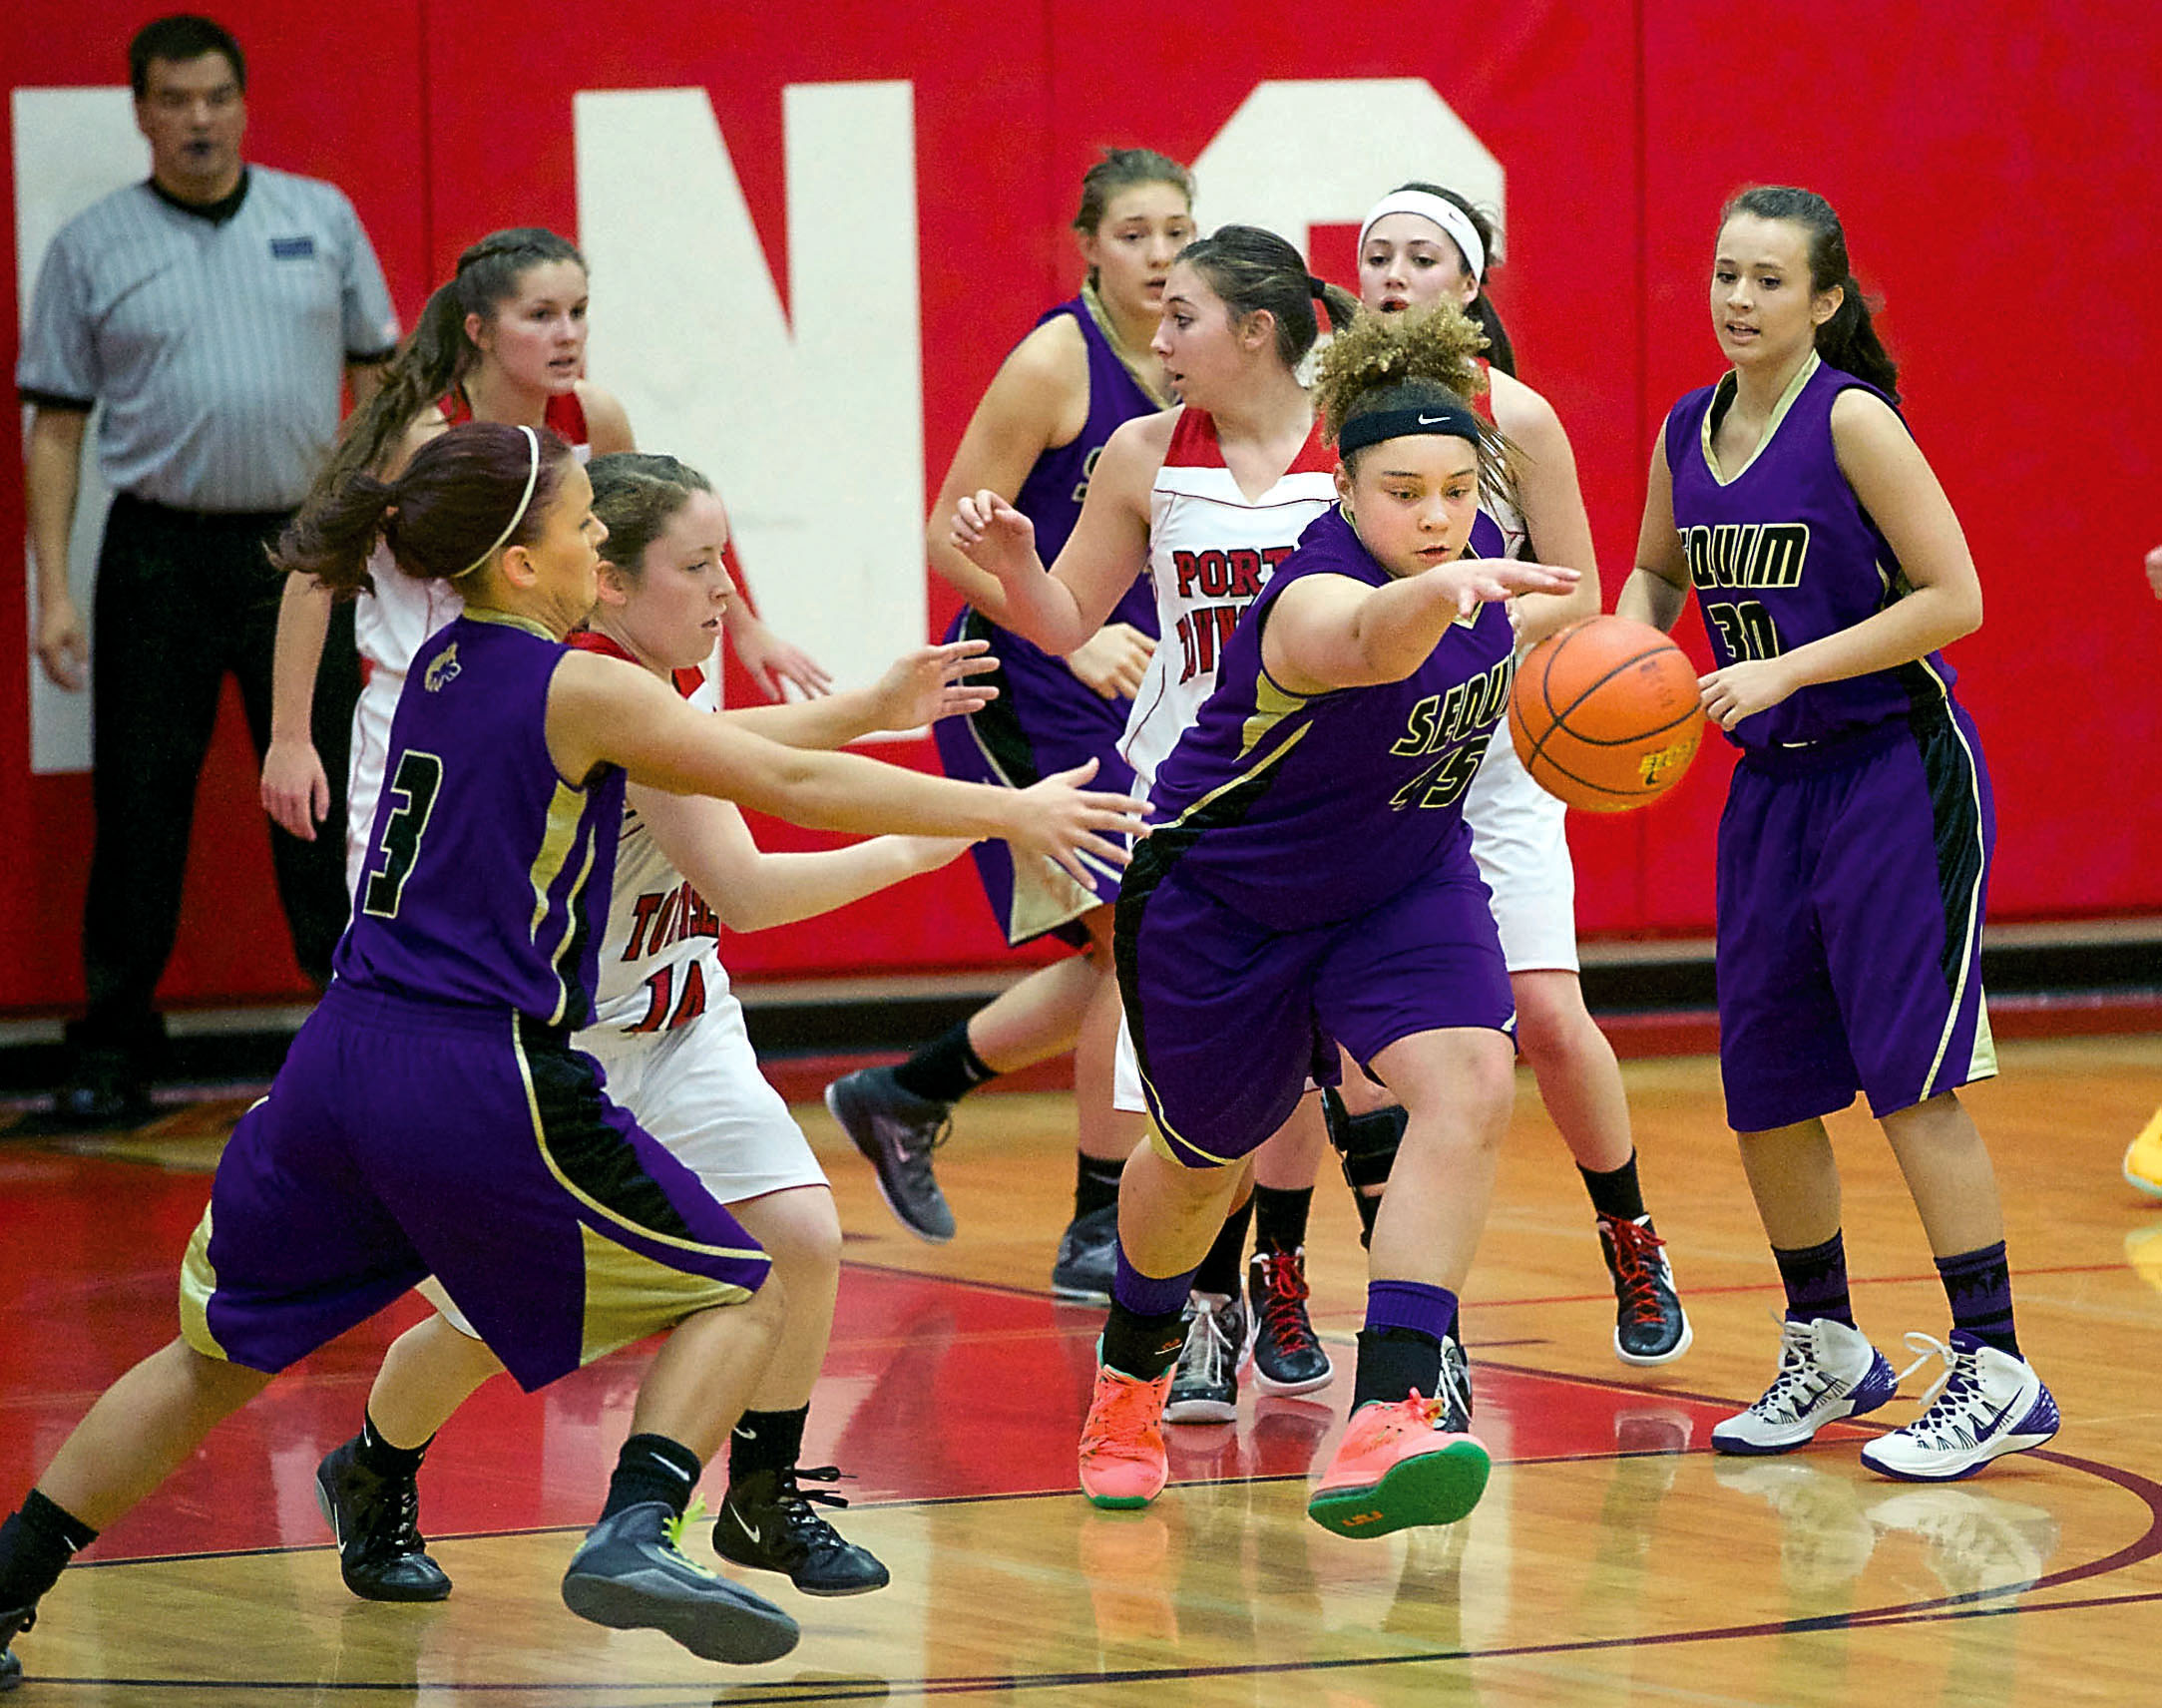 Sequim's Alexas Besand (45) tracks down a loose ball ahead of teammates Jordan Miller (30) and Hailey Lester (3) and Port Townsend's Megan Lee (14). Steve Mullensky/for Peninsula Daily News